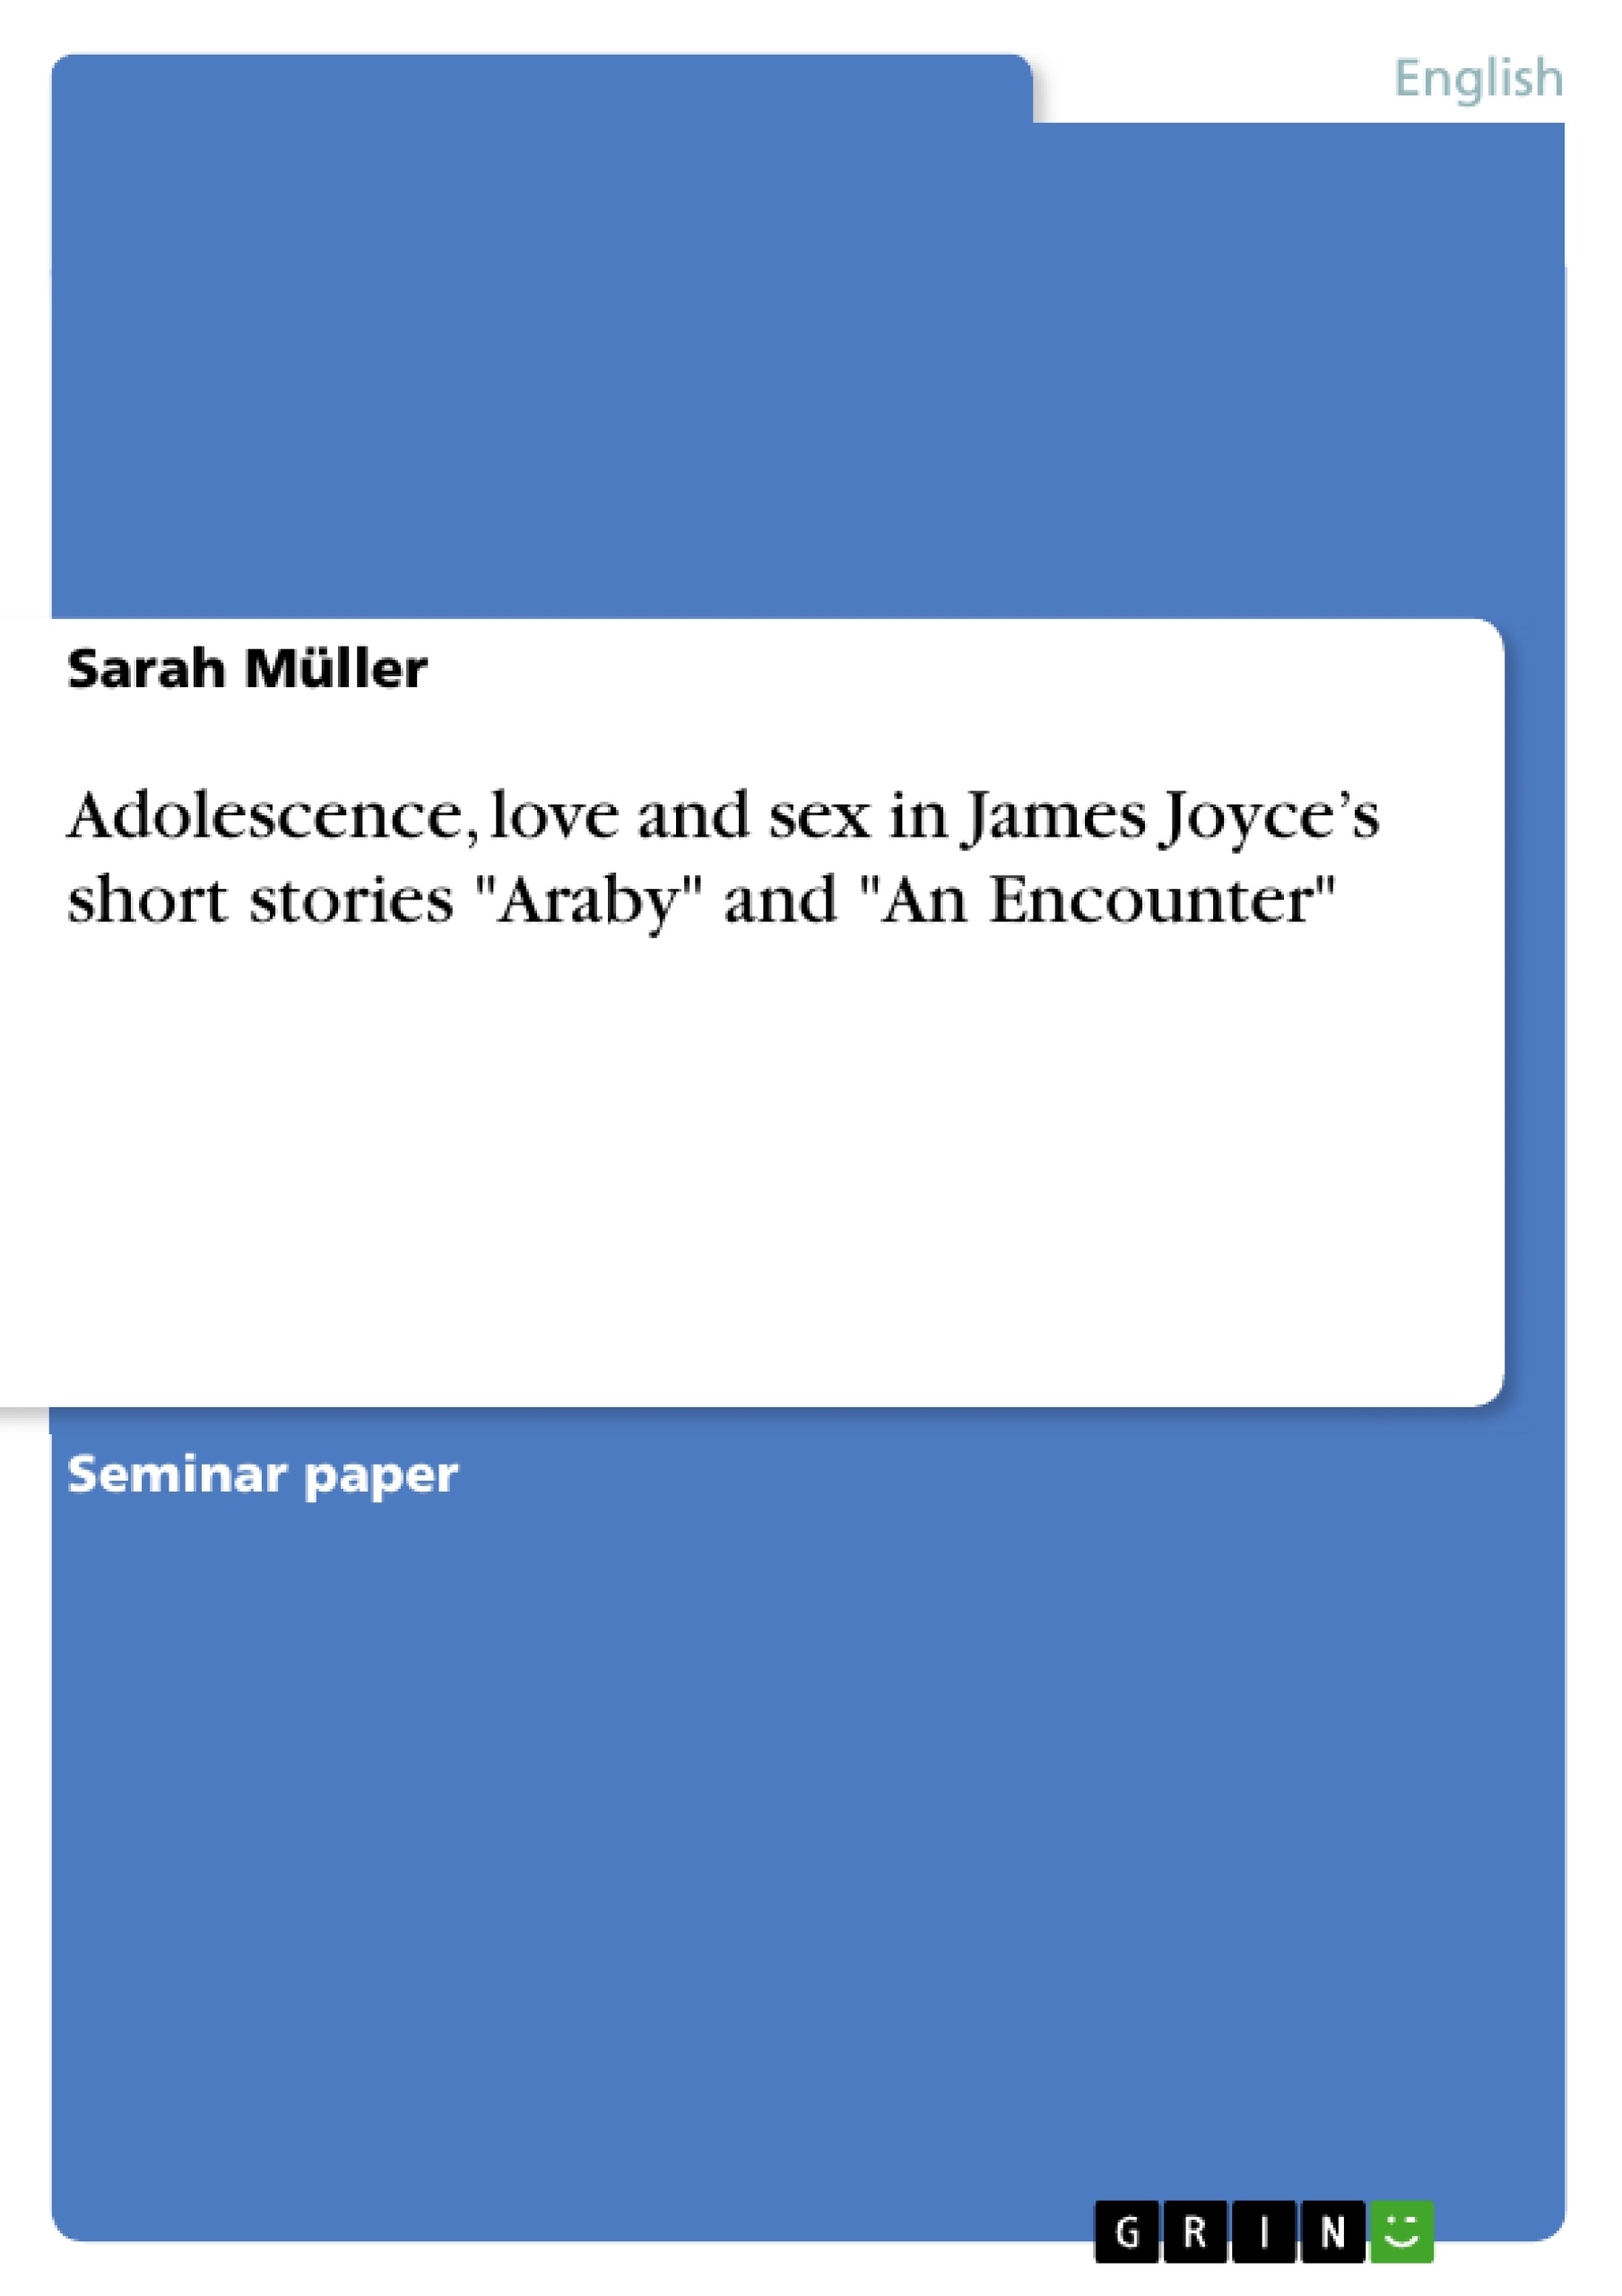 Título: Adolescence, love and sex in James Joyce’s short stories "Araby" and "An Encounter"